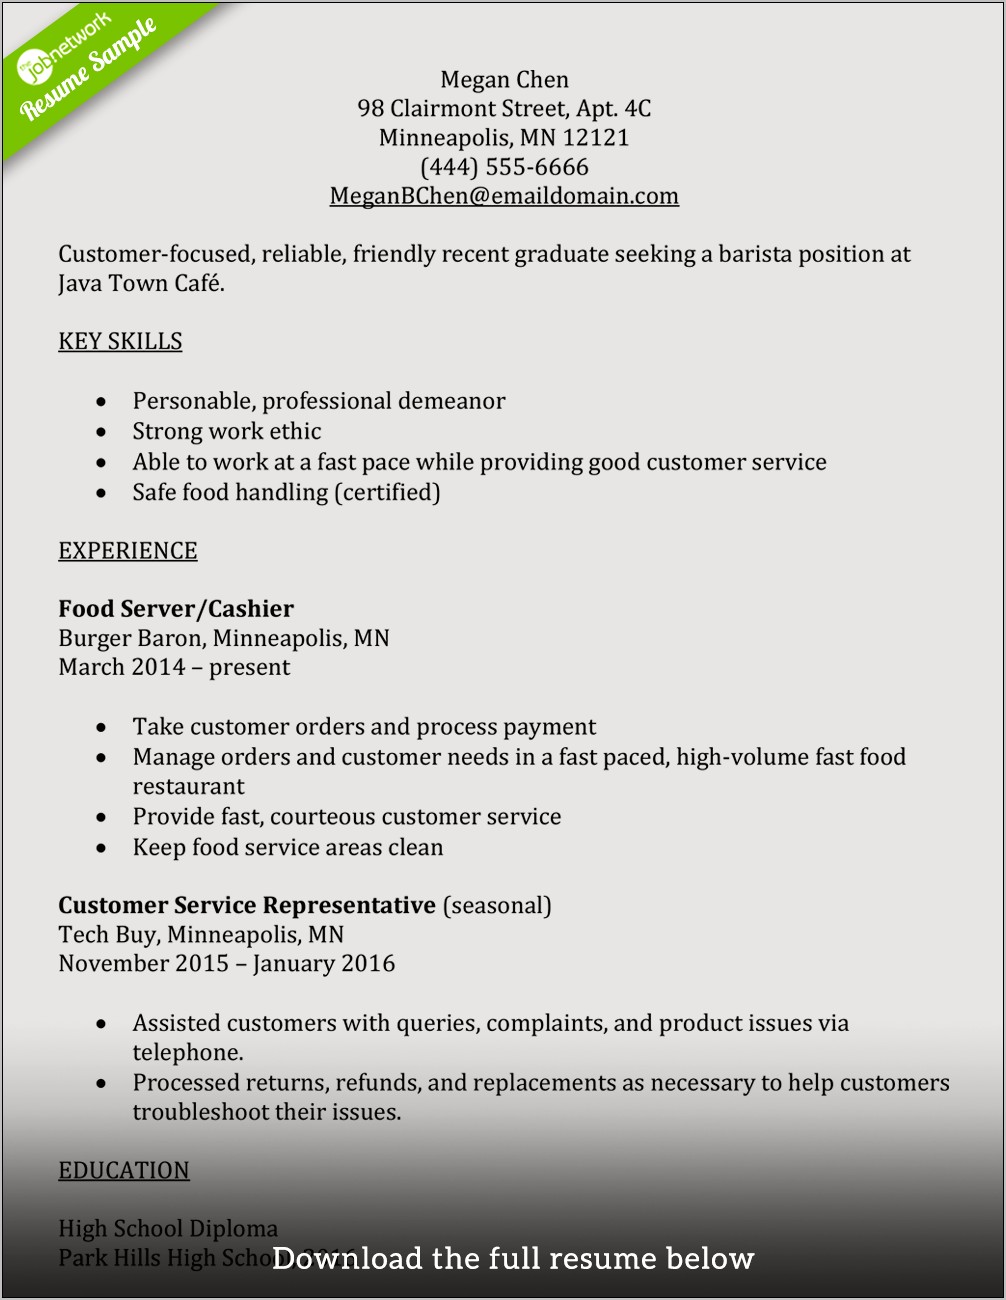 Perfect Wendy's Profesional Experience Resume